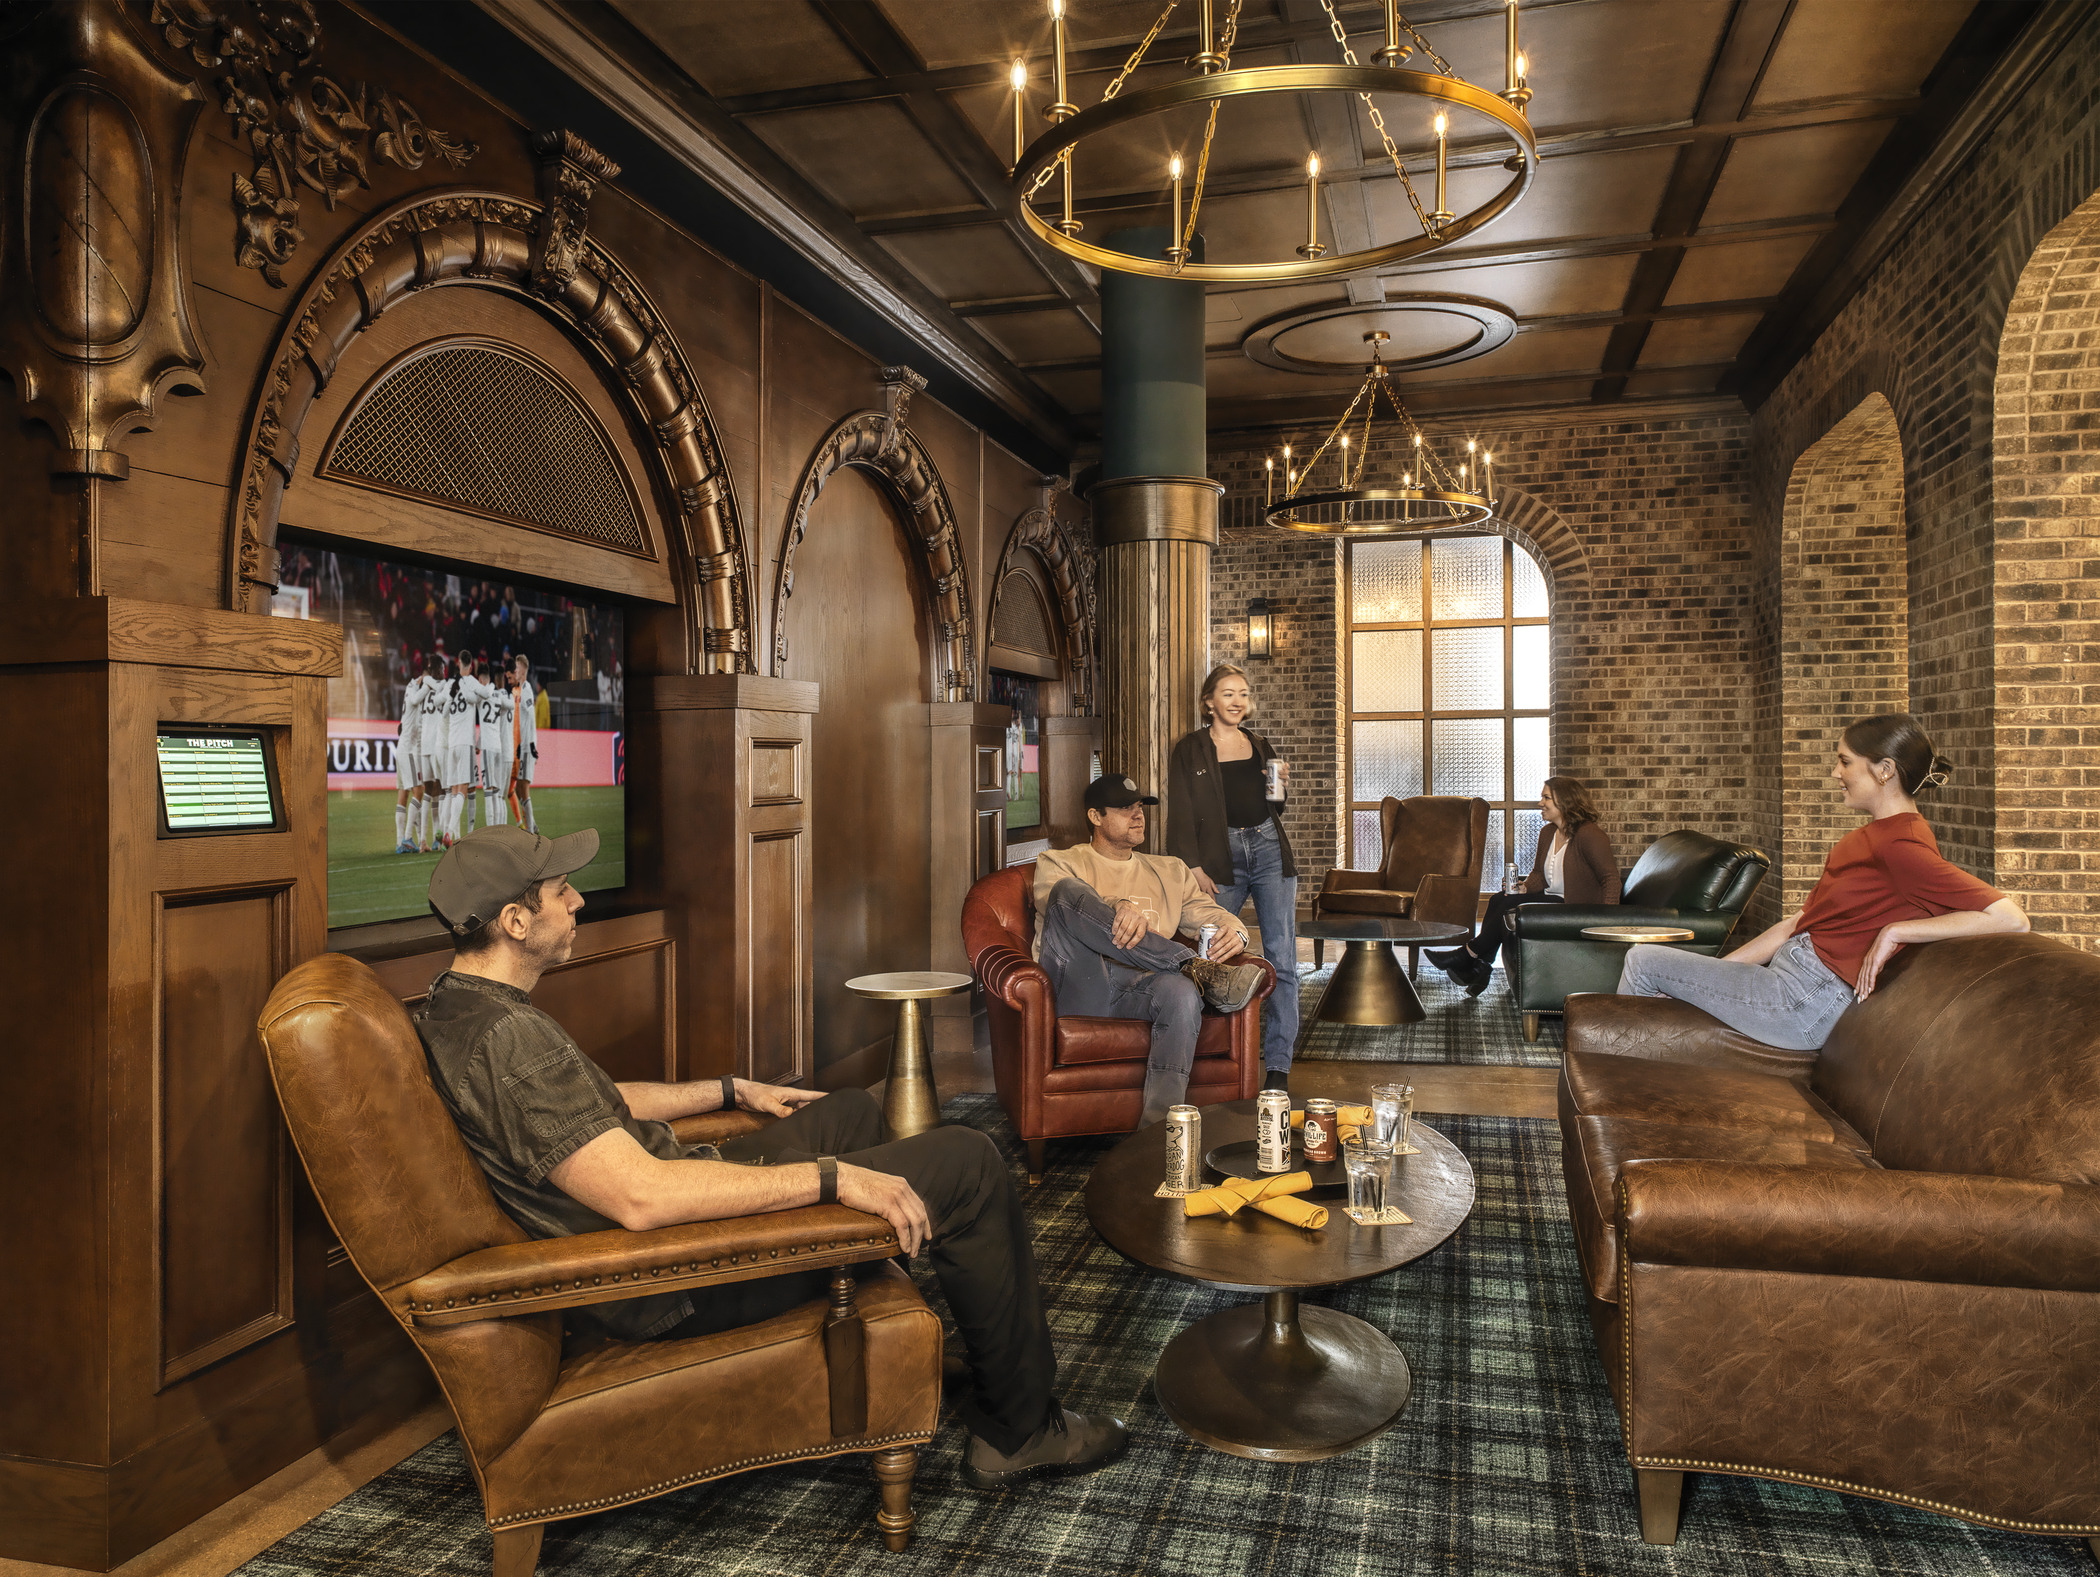 A group of 5 people relax in a lush lounge space, with soccer matches playing on TVs in recessed parts of the space's wall